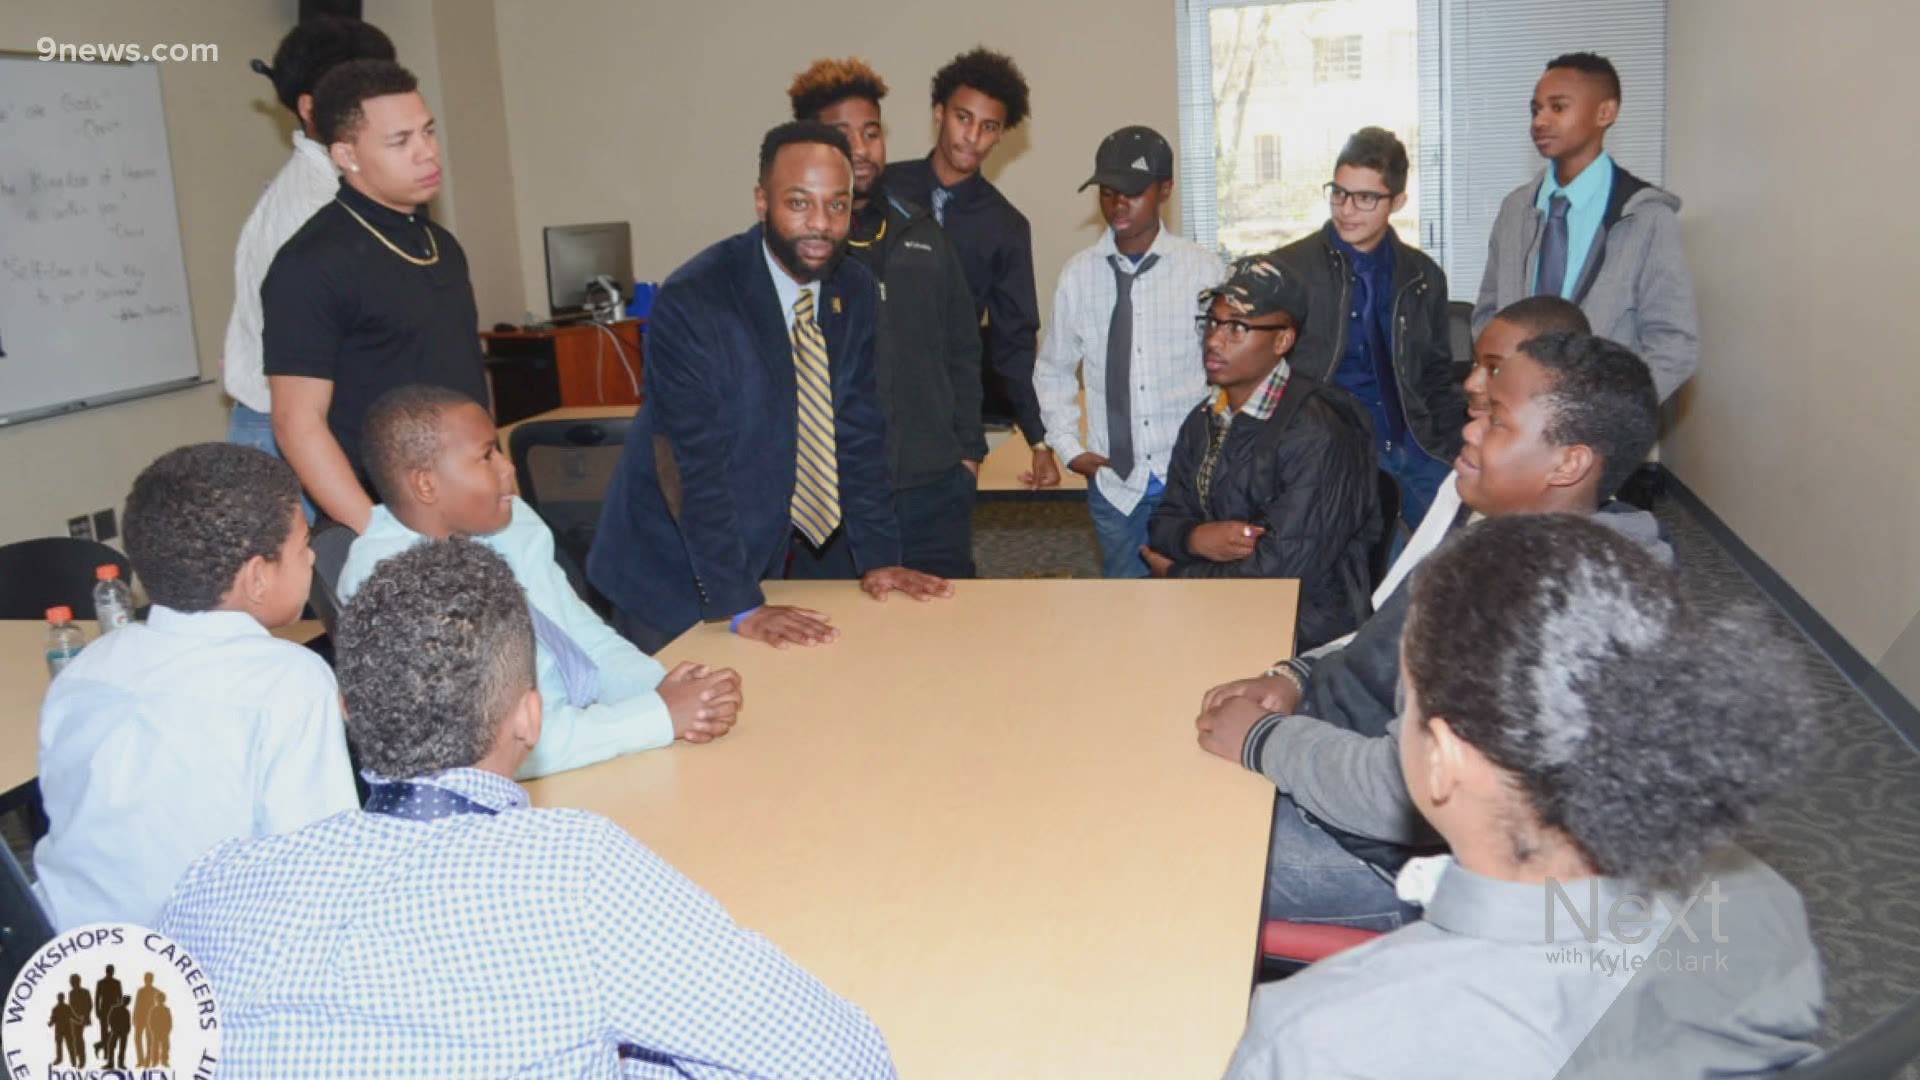 This week, we're highlighting The Crowley Foundation in Denver, which helps connect young black men with mentoring, as well as leadership and educational programs.